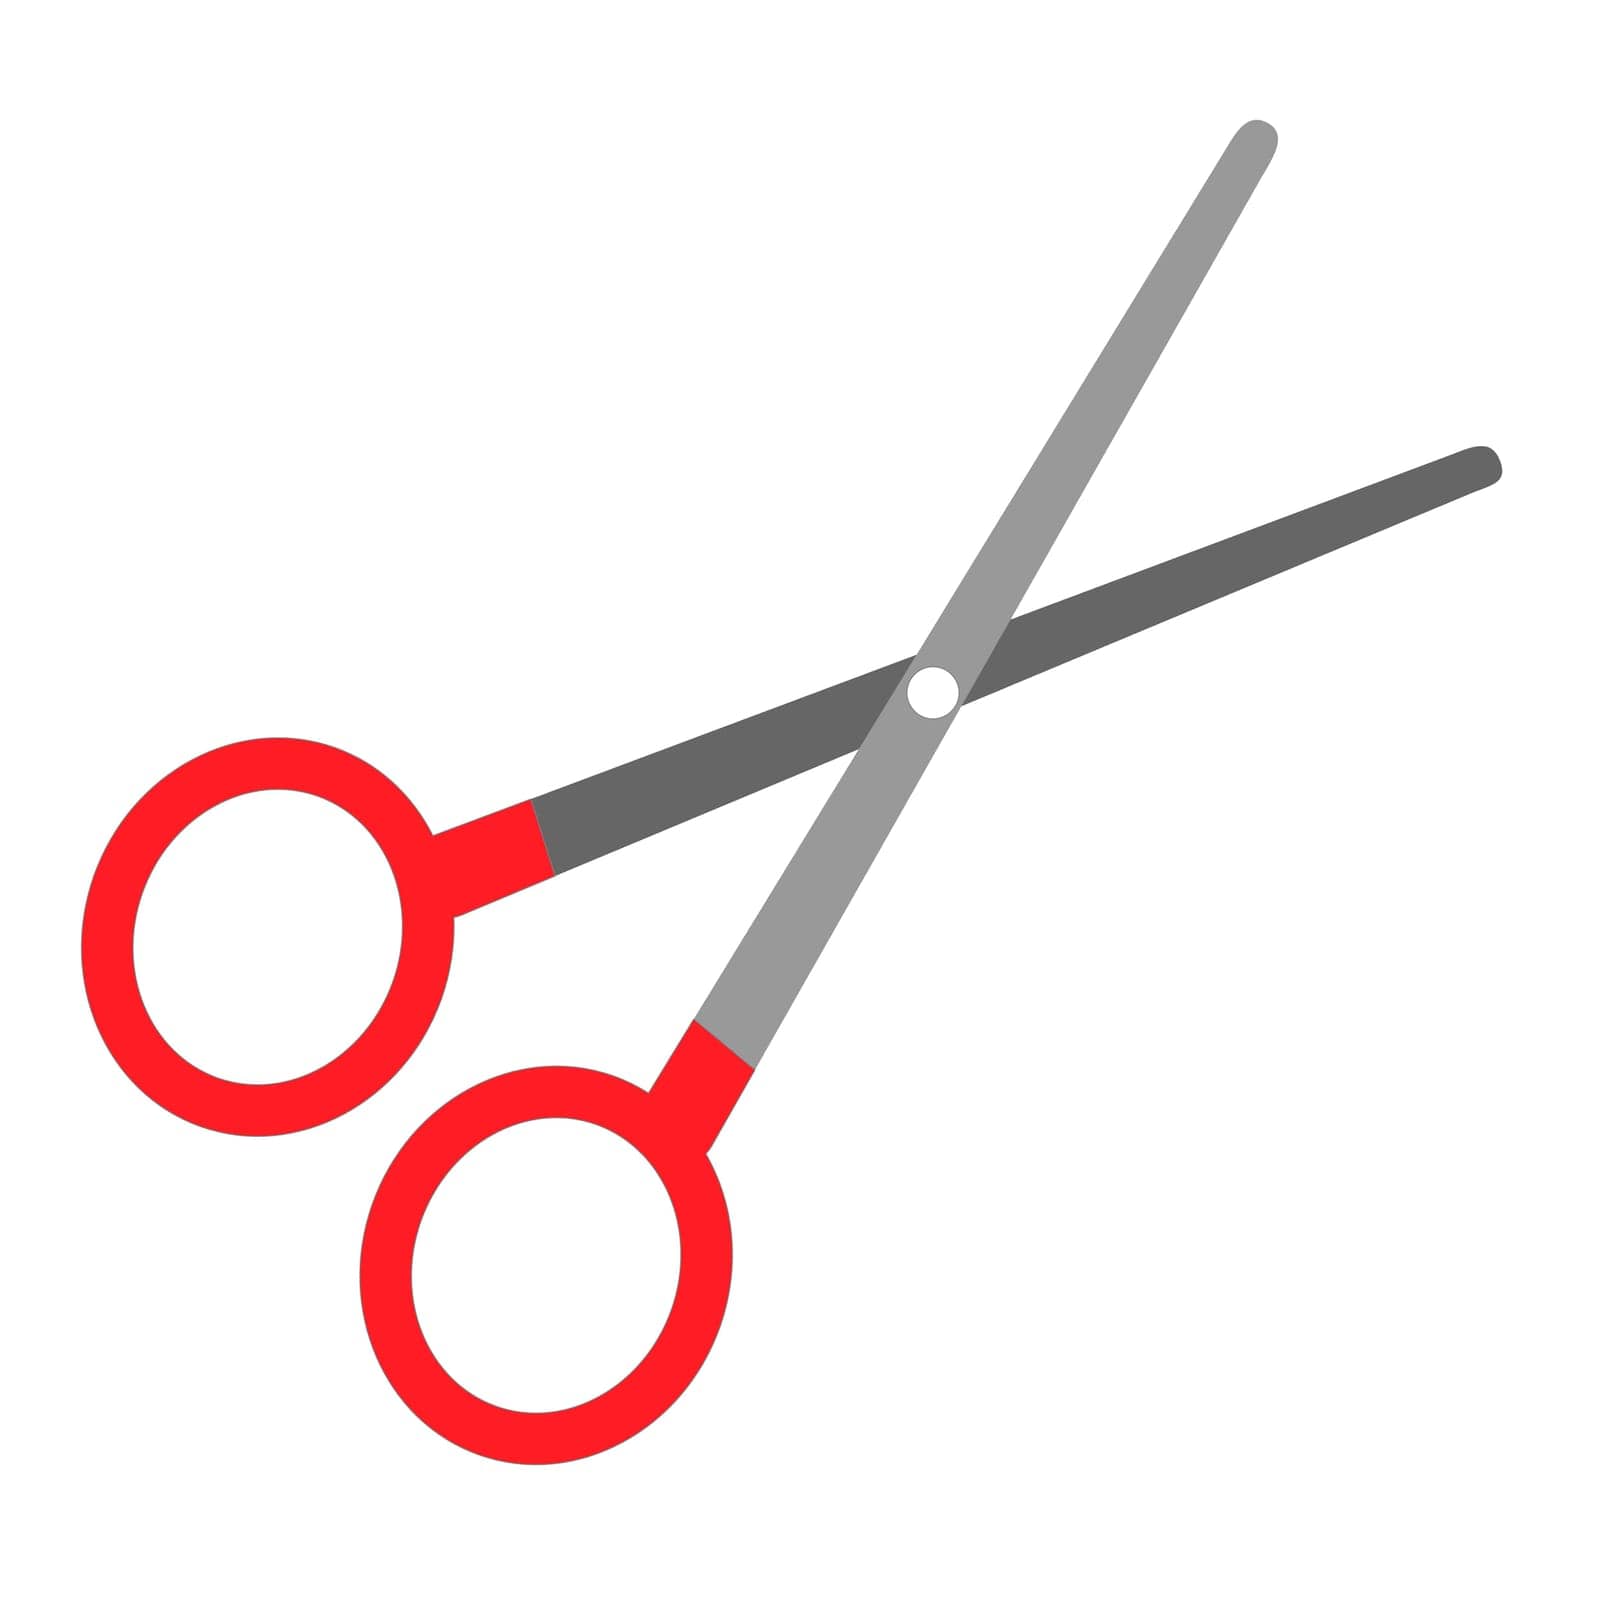 Isolated scissors symbol icon in a flat style by Bissekeyeva